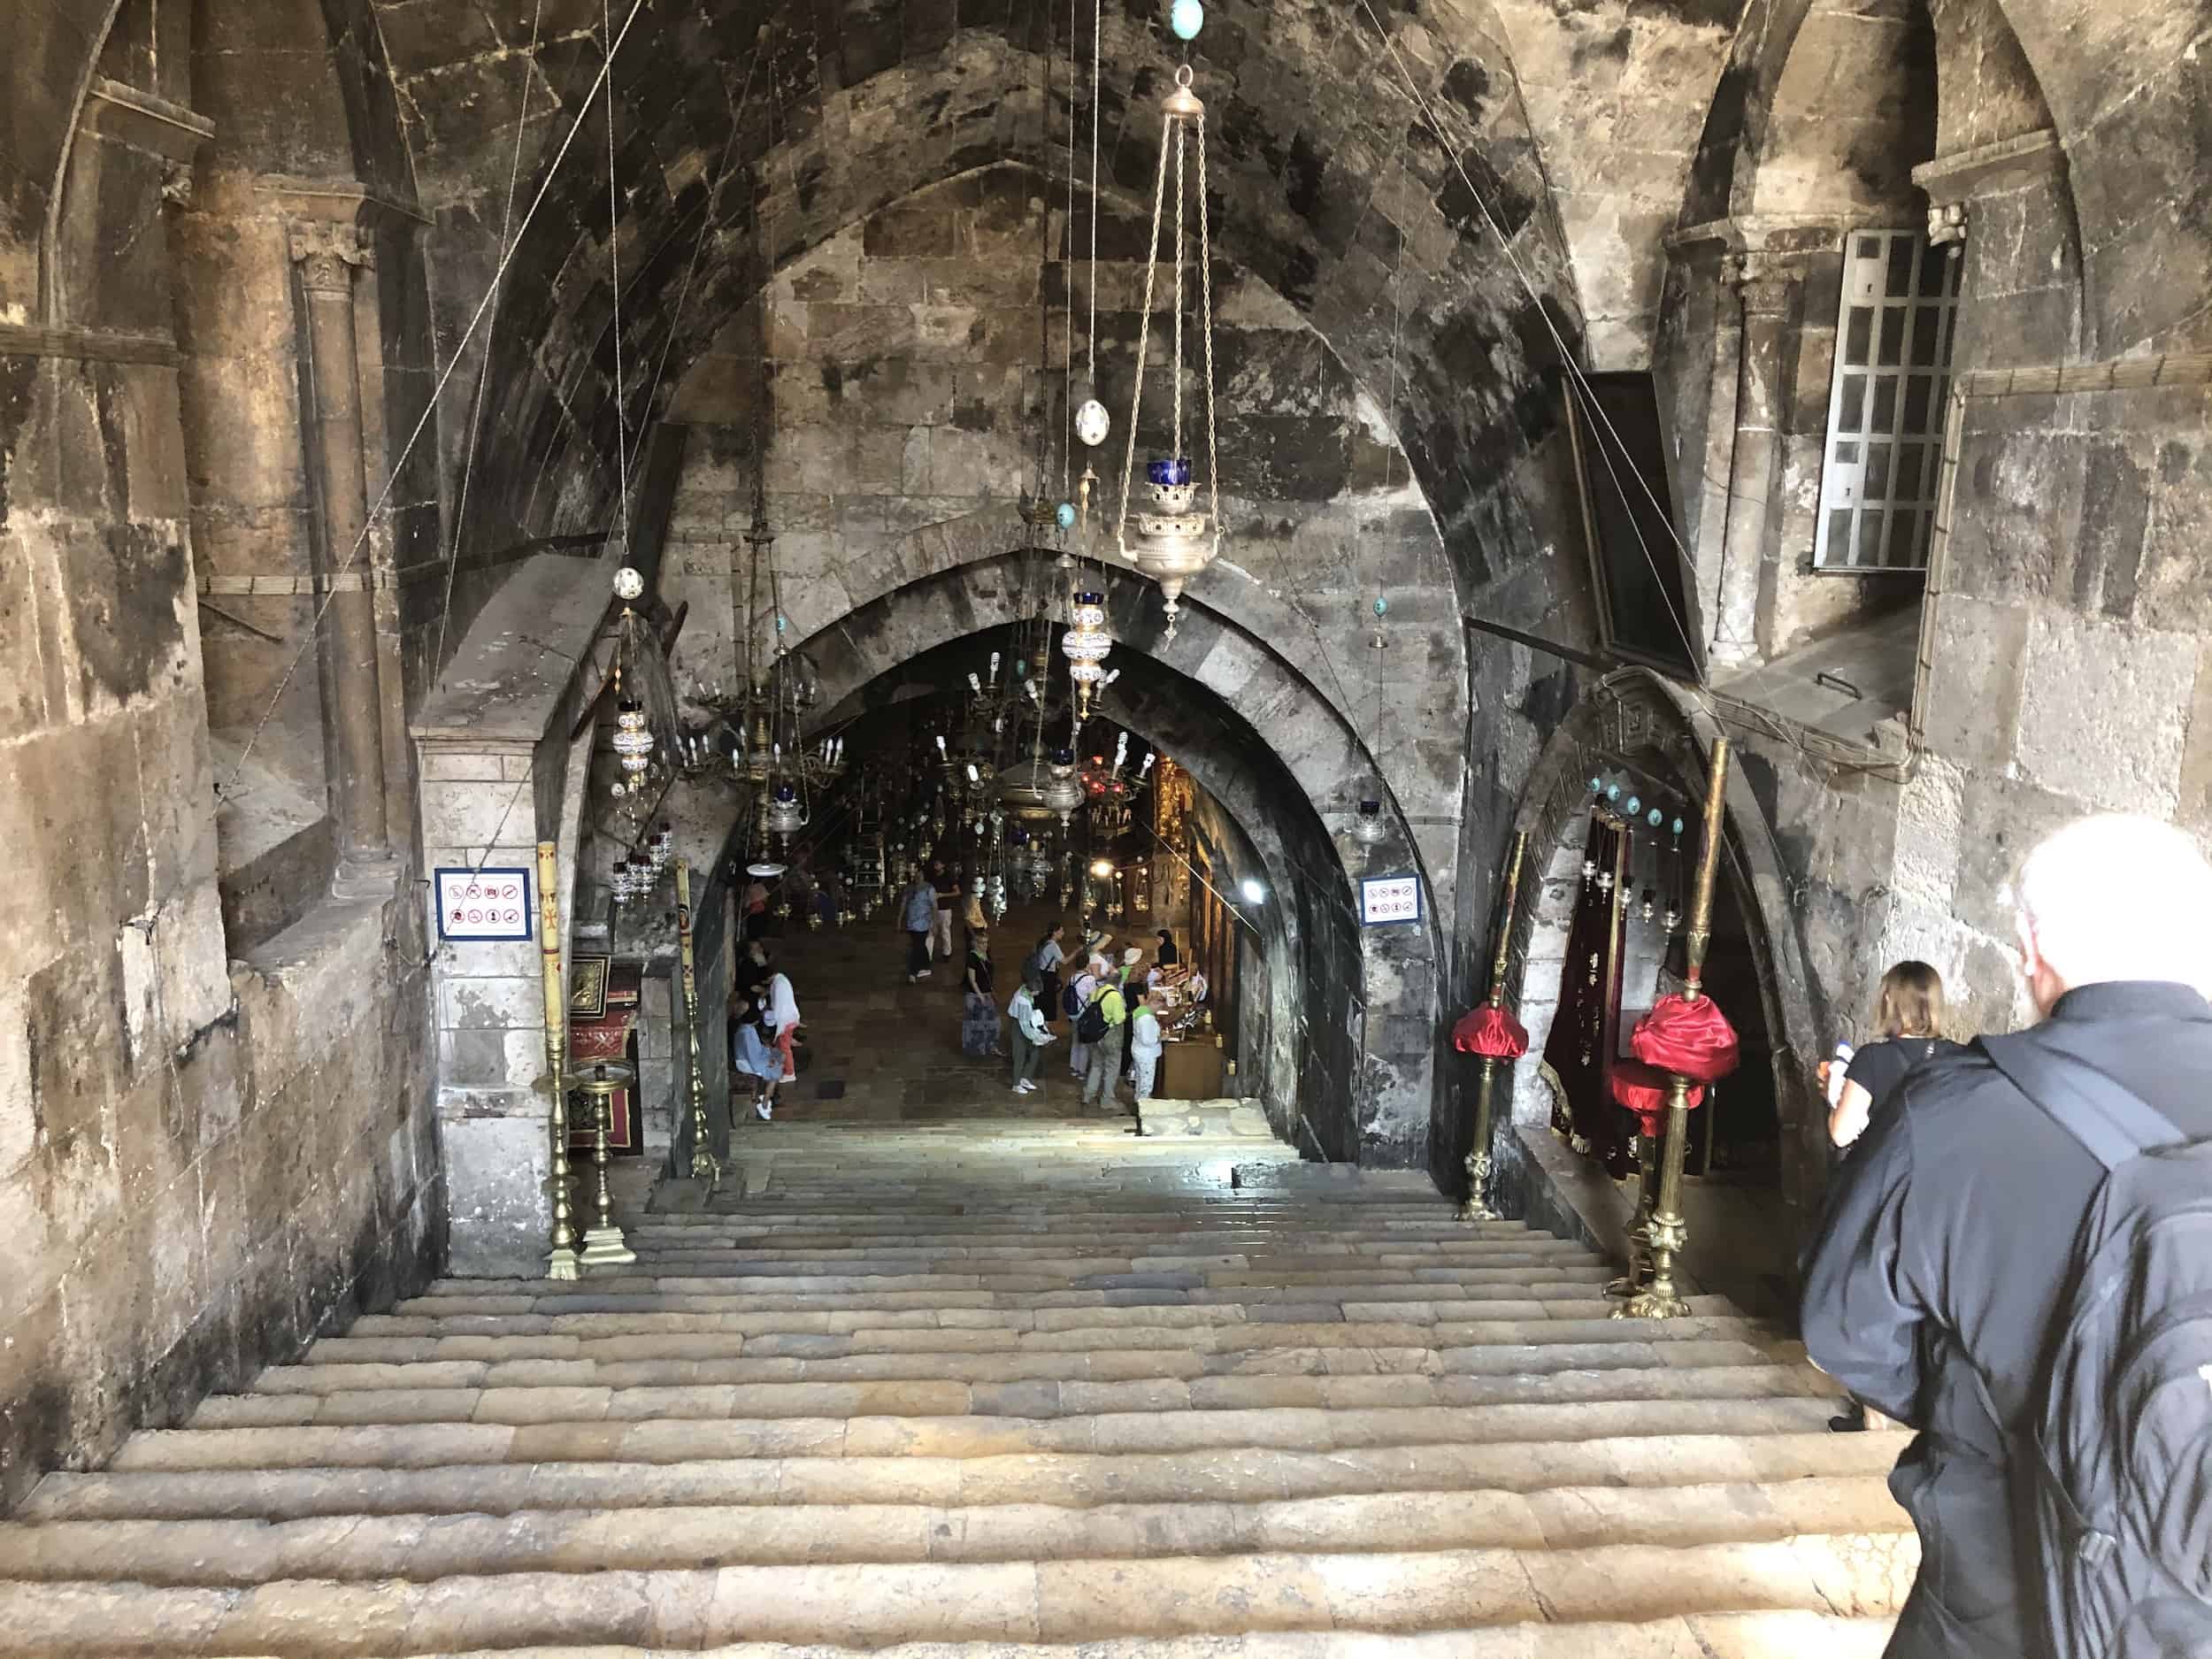 Looking down the stairs to the Tomb of the Virgin Mary at Gethsemane in Jerusalem